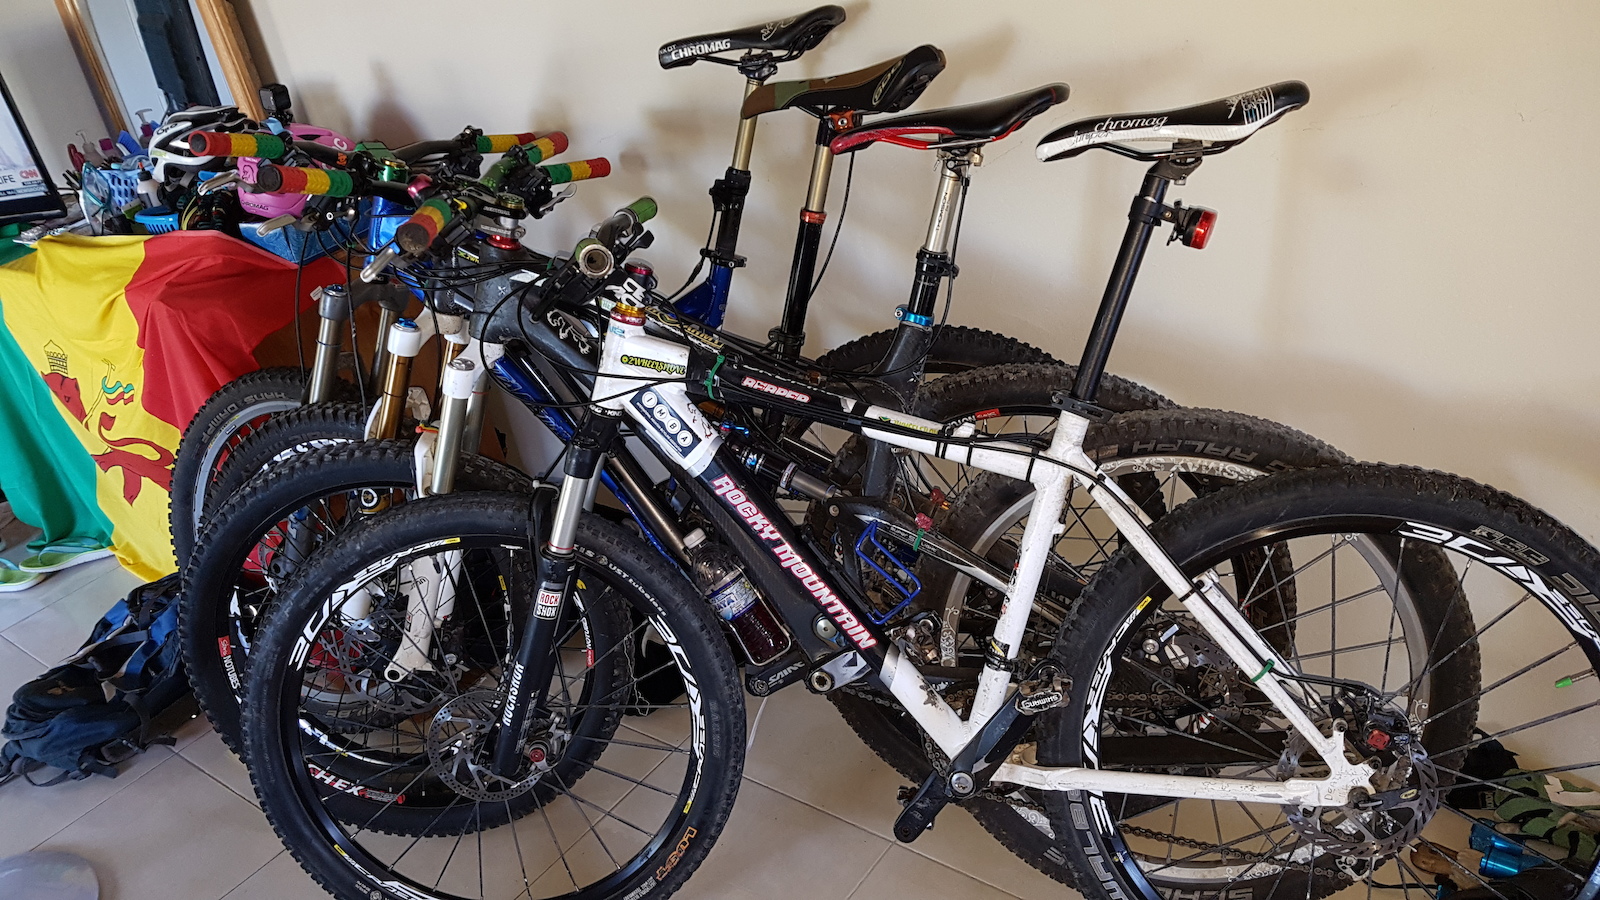 Zion Mountain Bike ever growing rental stock:
Mojo, Nomad, Bandit and a Reaper.